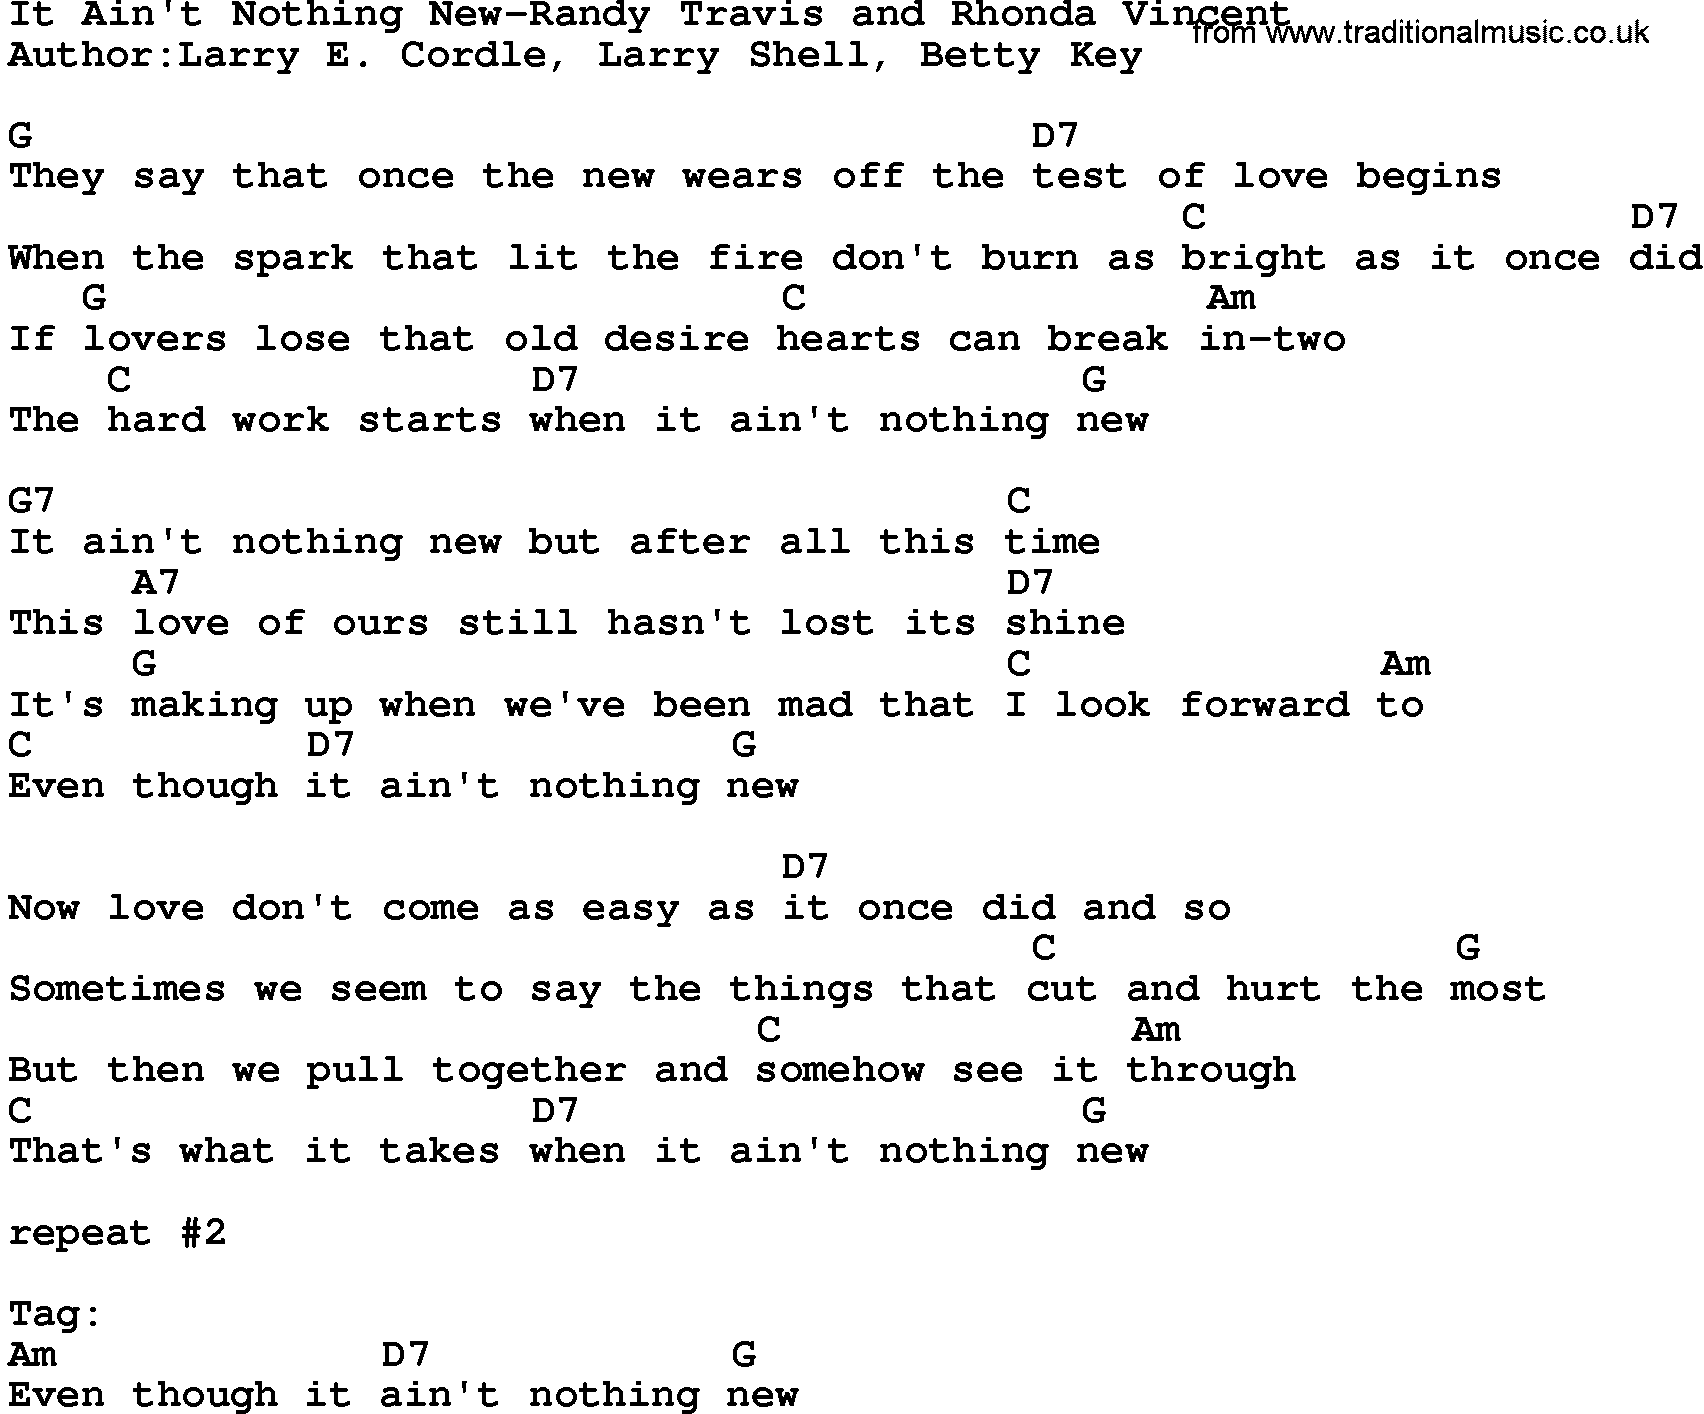 Country music song: It Ain't Nothing New-Randy Travis And Rhonda Vincent lyrics and chords